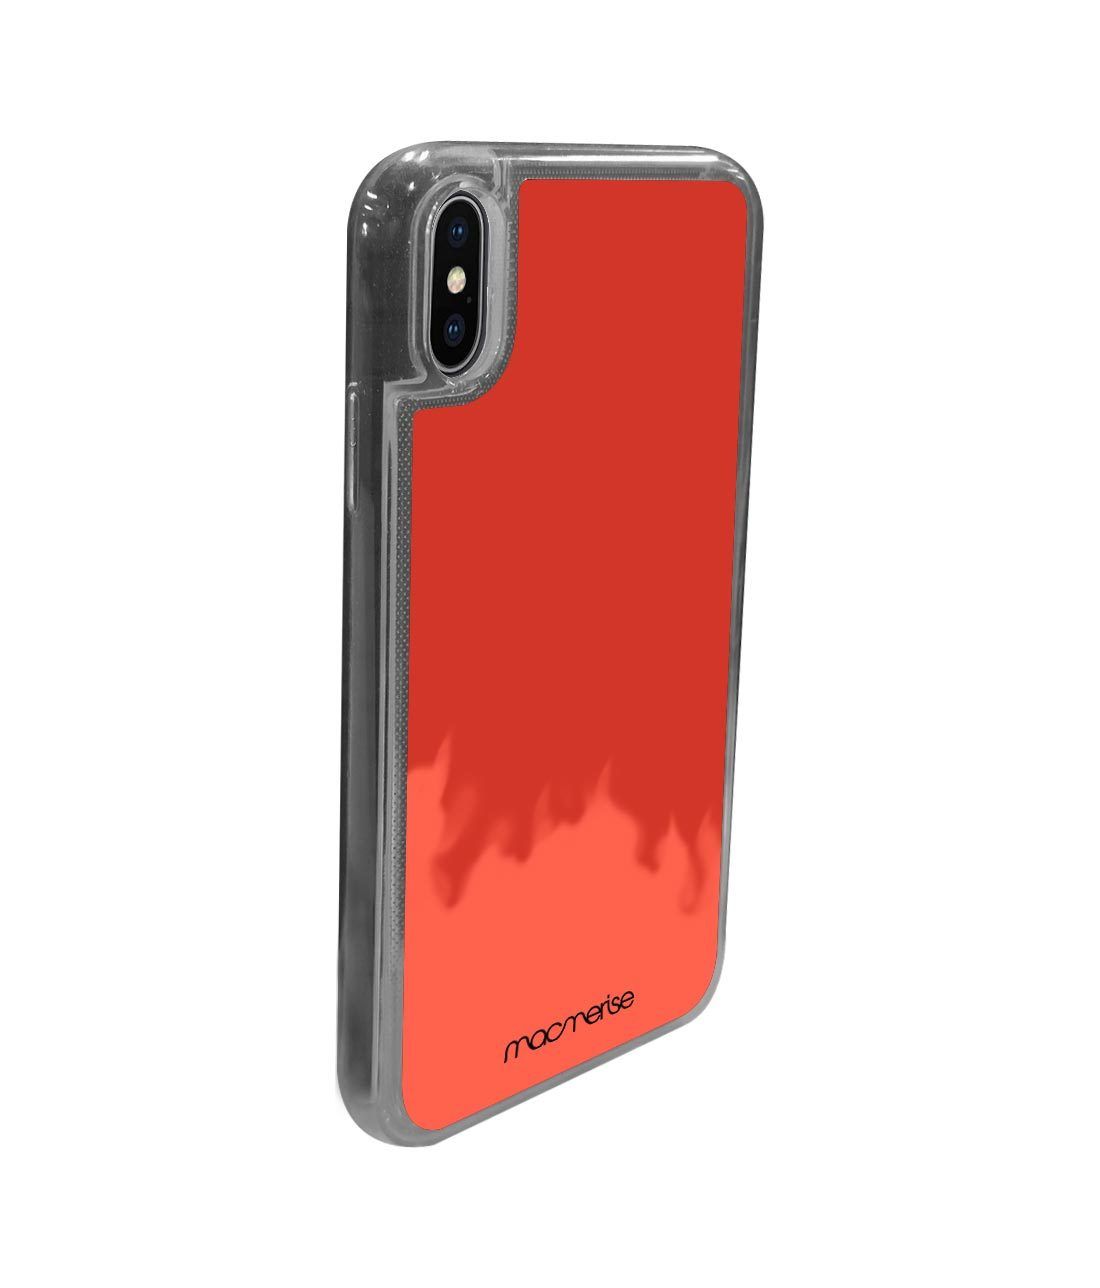 Neon Sand Red - Neon Sand Phone Case for iPhone X